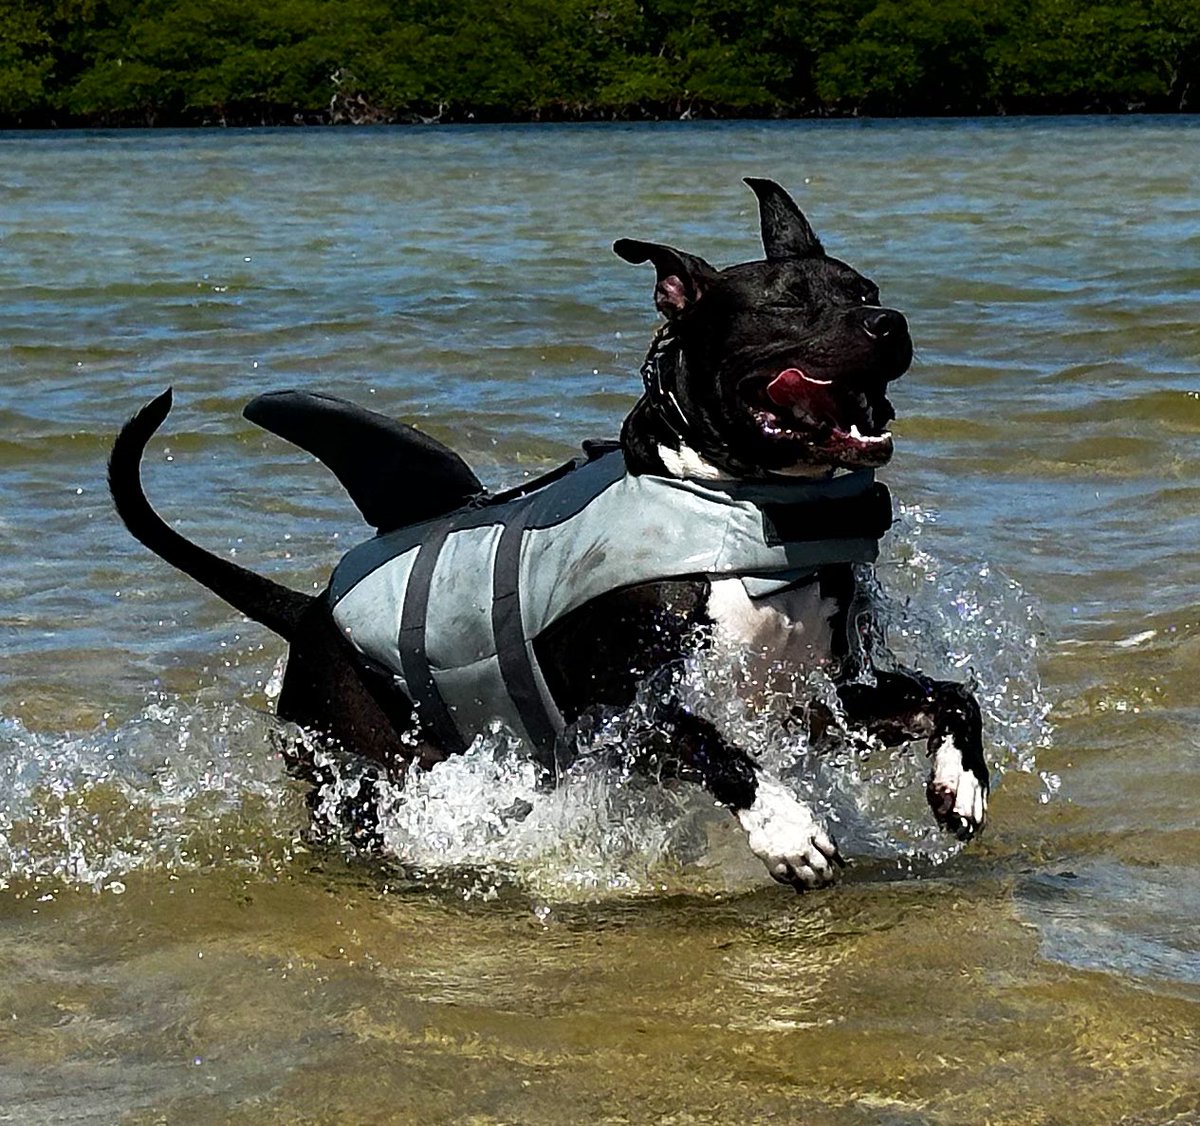 Sunday funday we took the dogs paddleboarding…

Likely the perfect adventure 

Yes, that’s a real #sharkdog